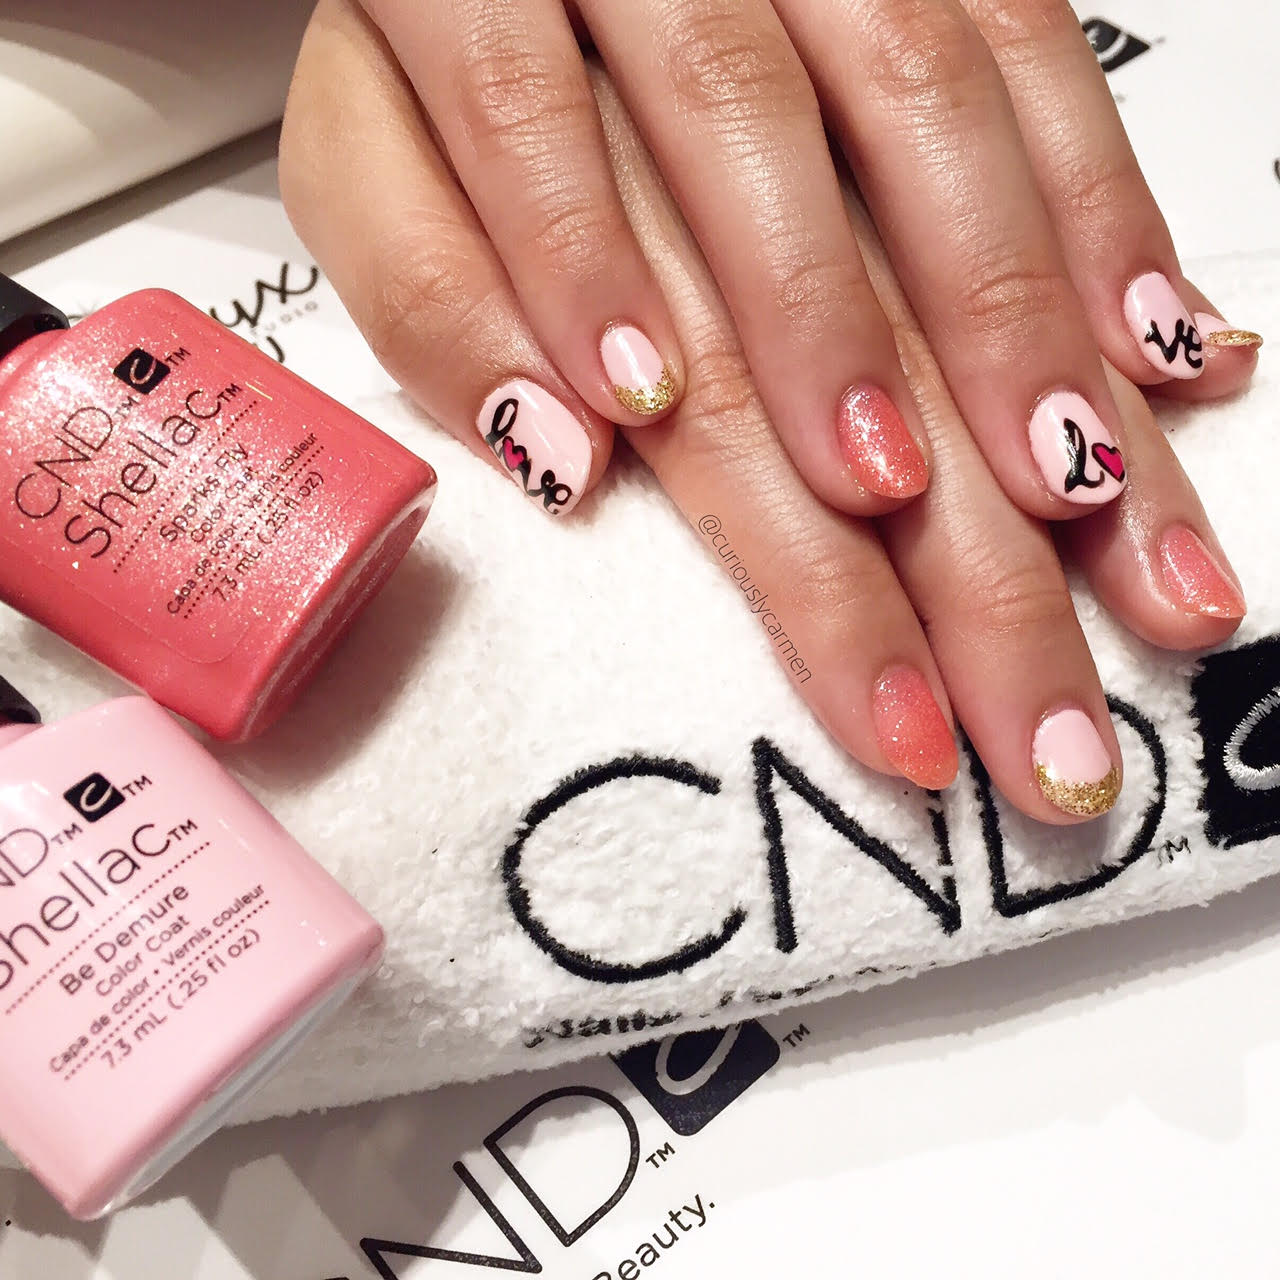 Valentine's day Shellac nails with CND's new summer line! - Curiously Carmen